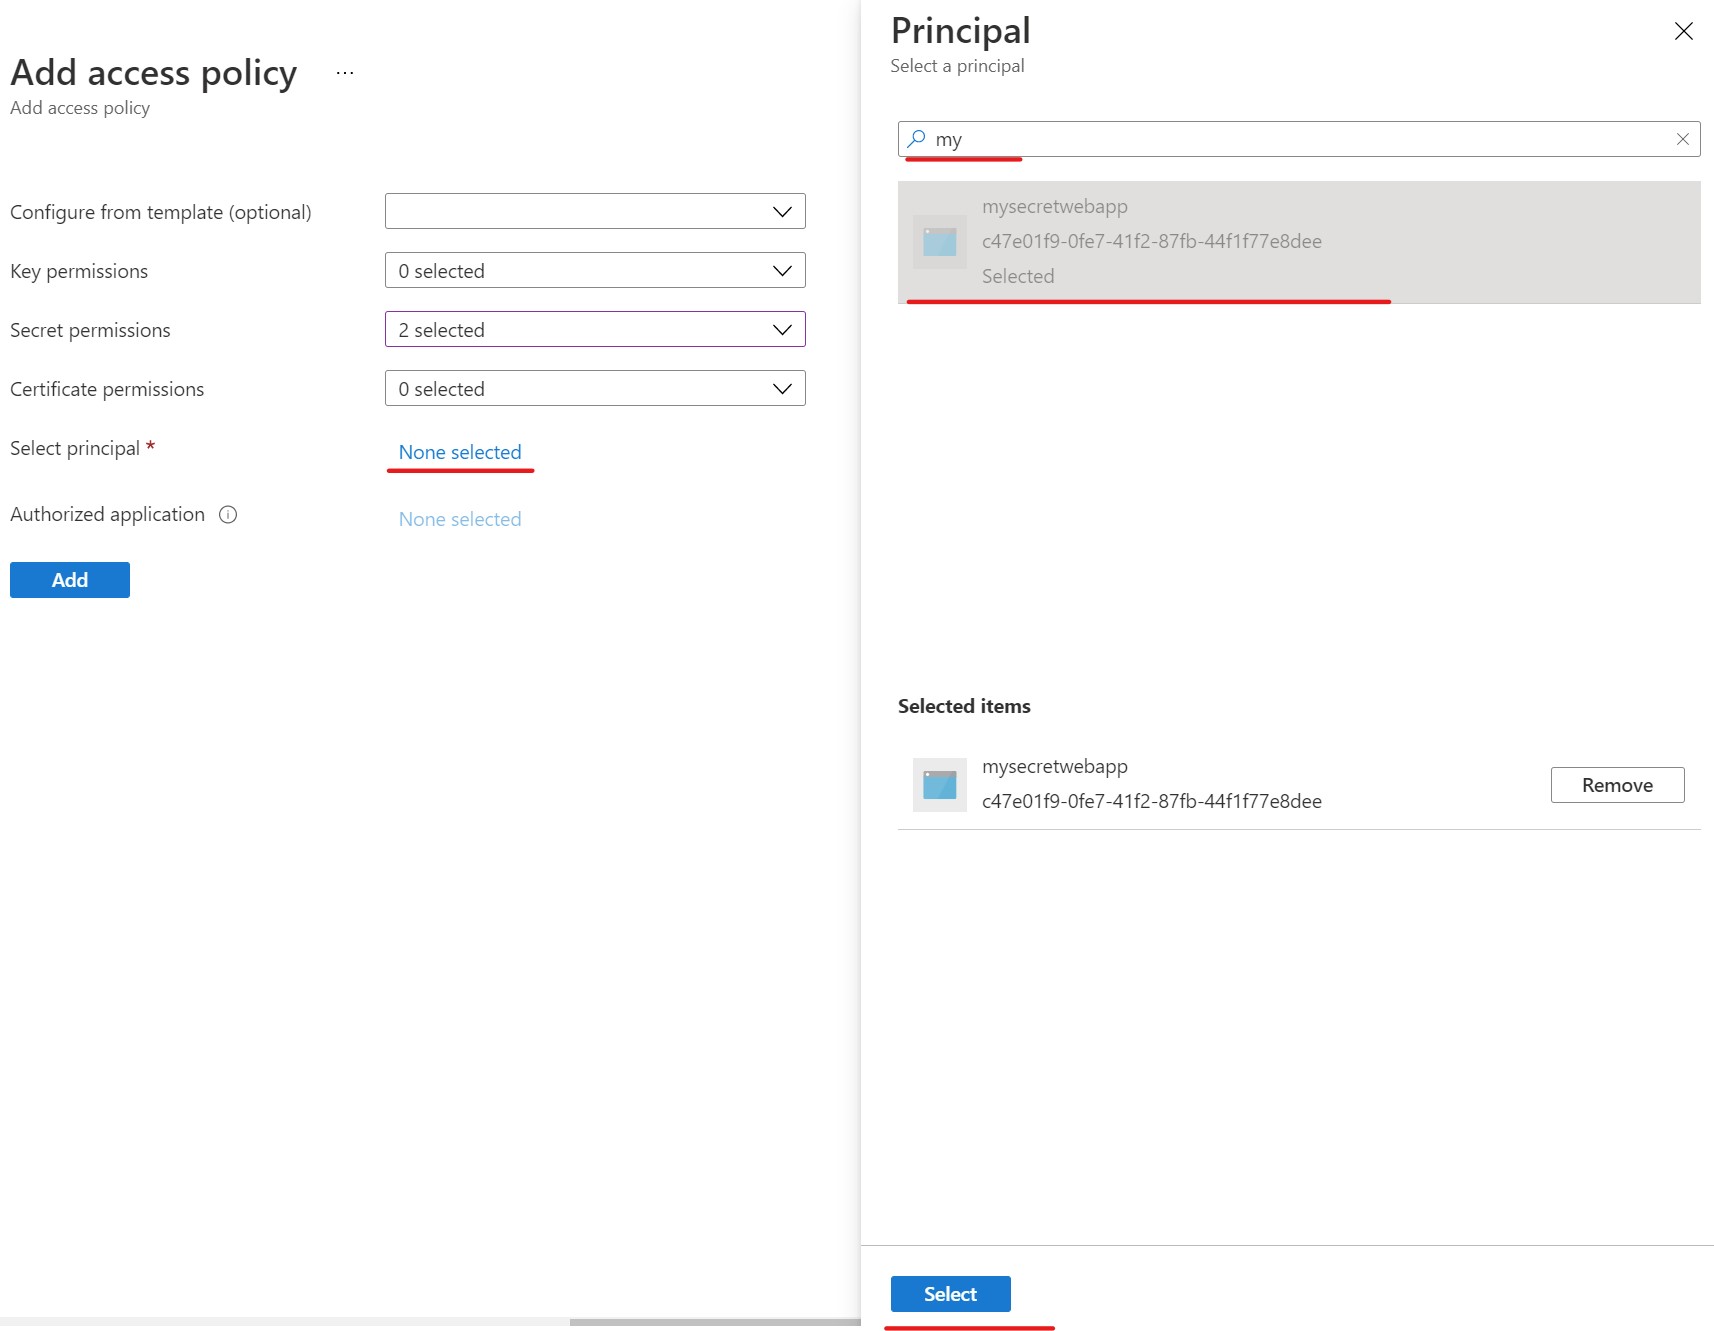 select principal for add access policy screen